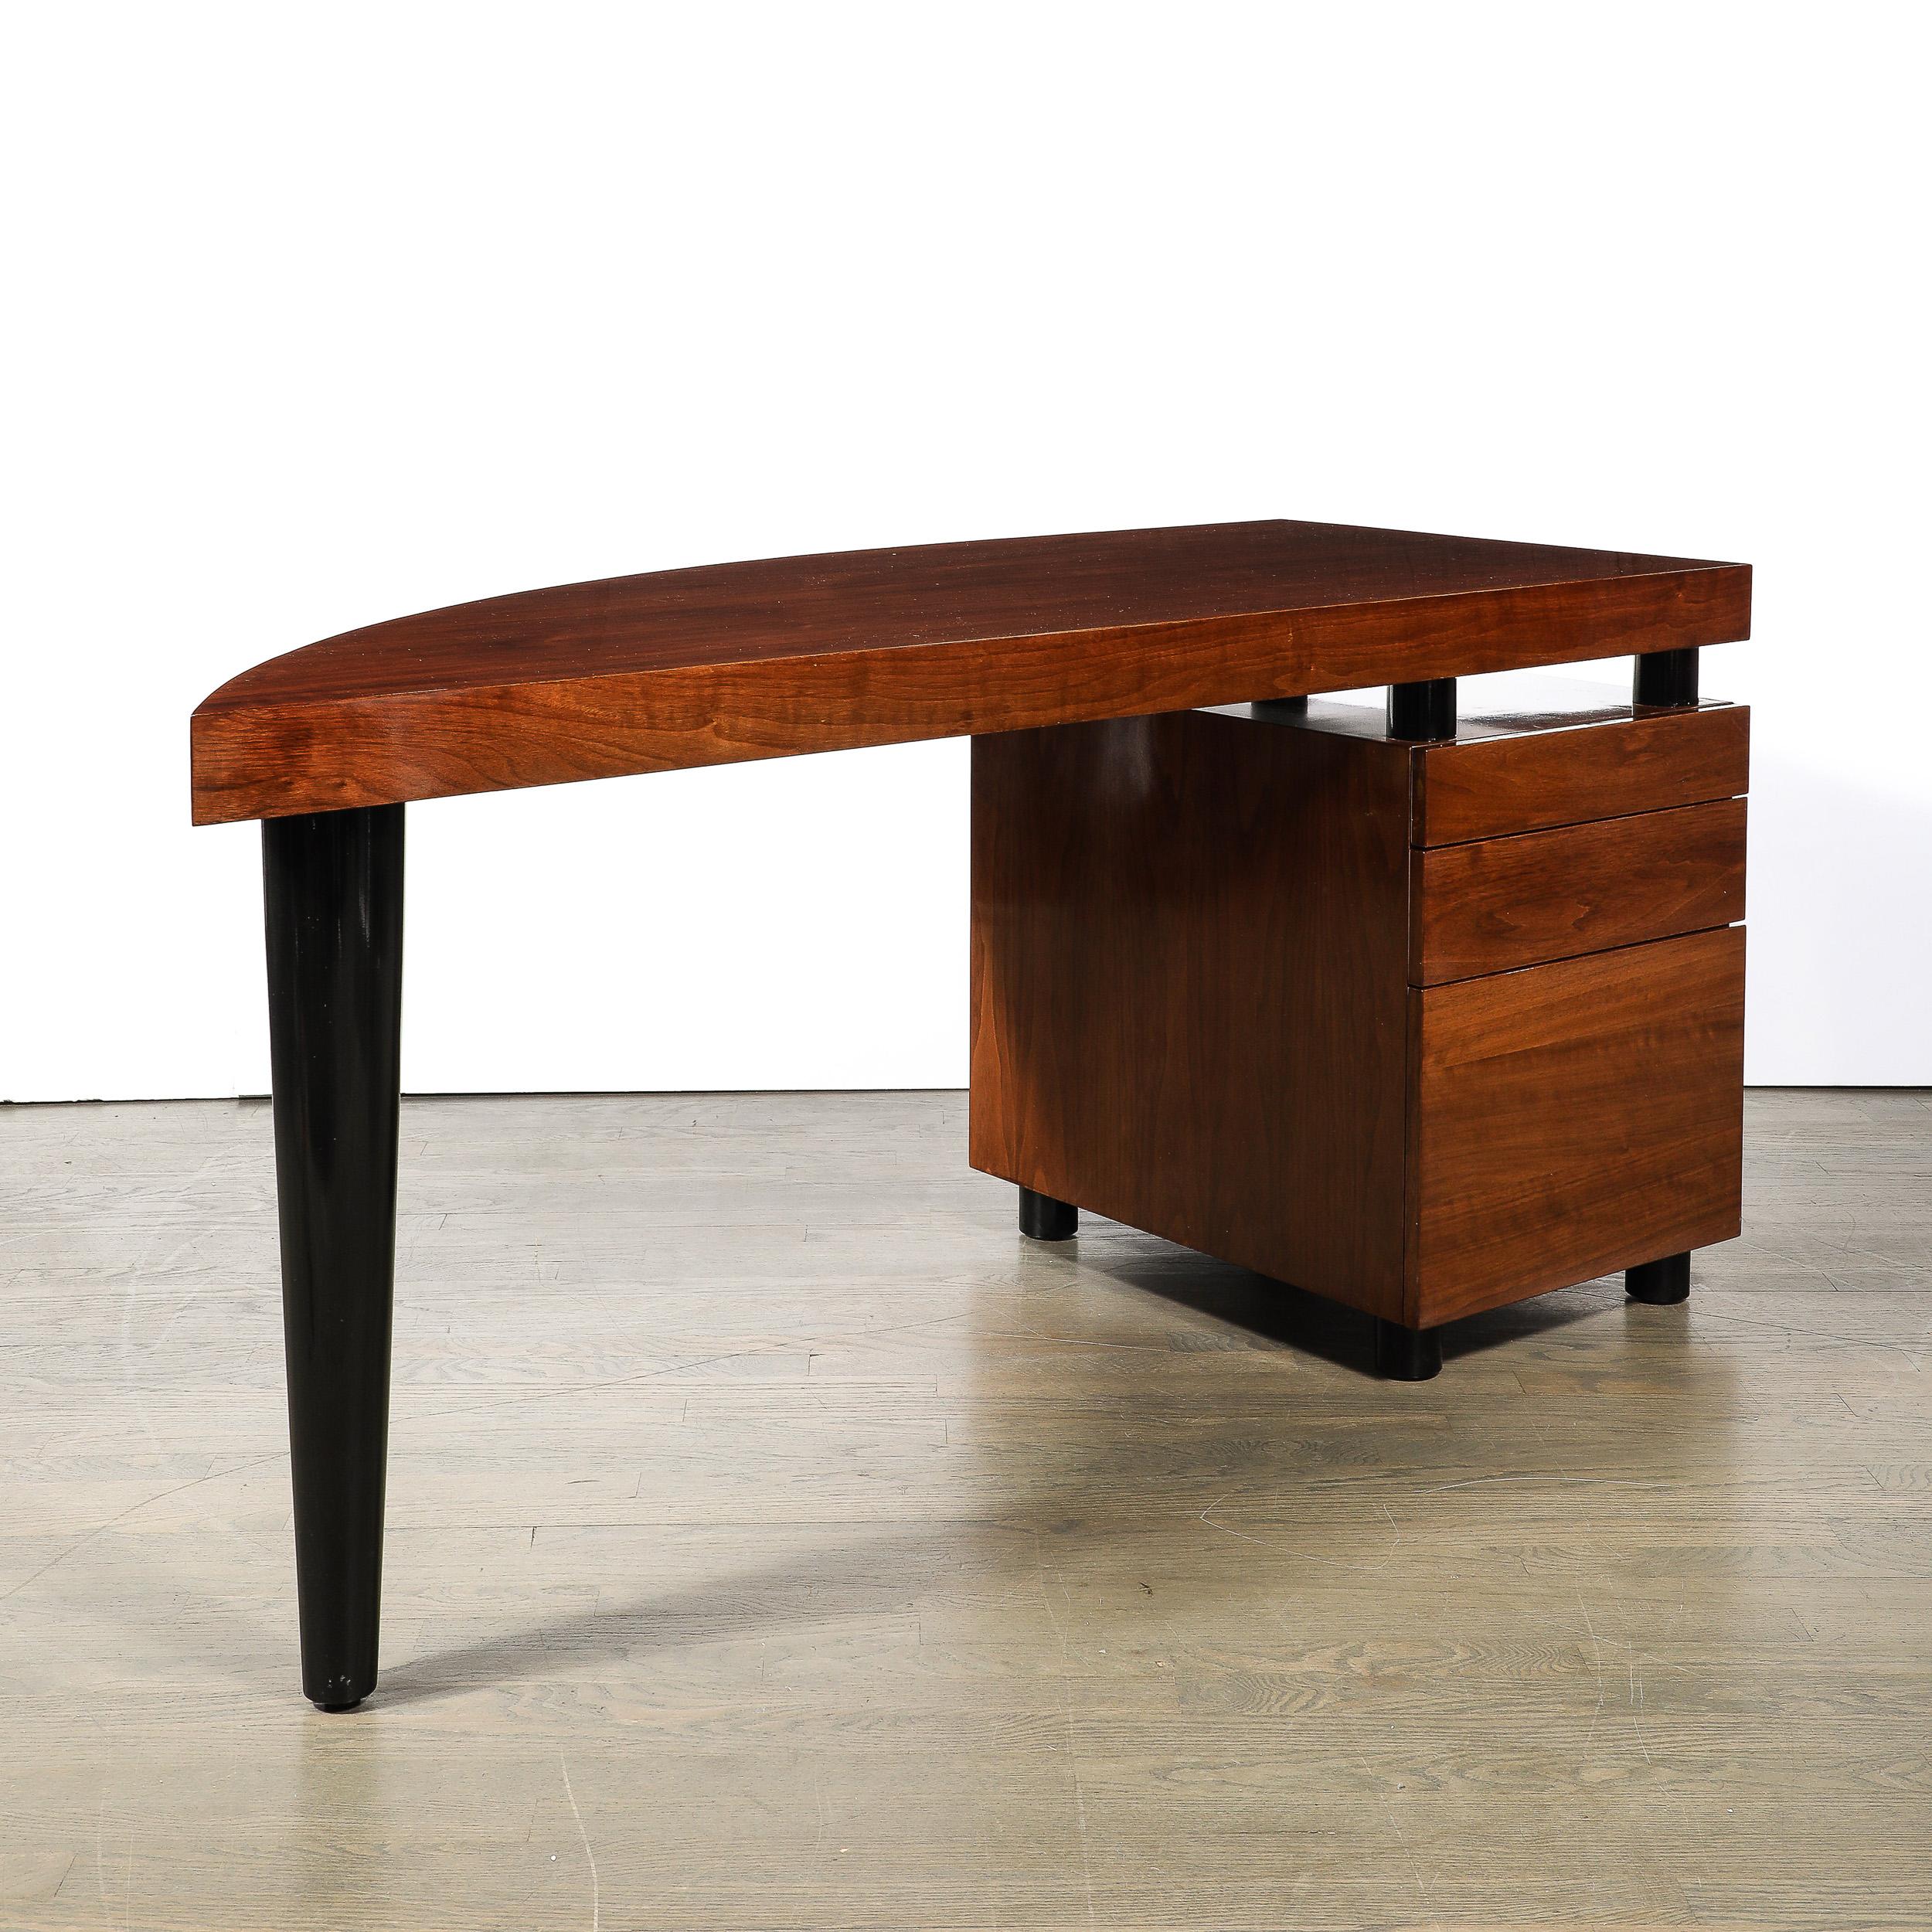 American Mid-Century Bookmatched Walnut W/ Tapered Leg Boca Desk by Leon Rosen for Pace For Sale